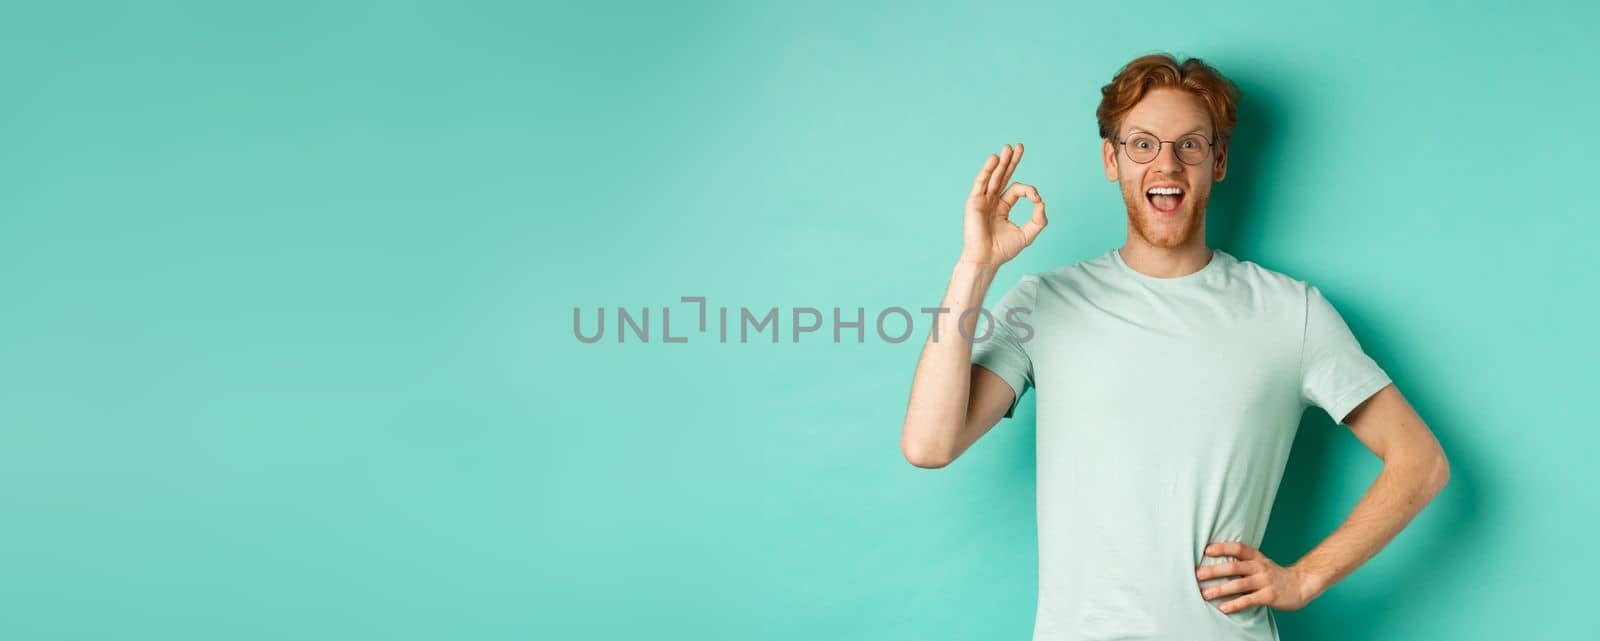 Amused young man with red hair, wearing glasses and t-shirt, showing okay sign and smiling excited, checking out something and approving it, standing over turquoise background.